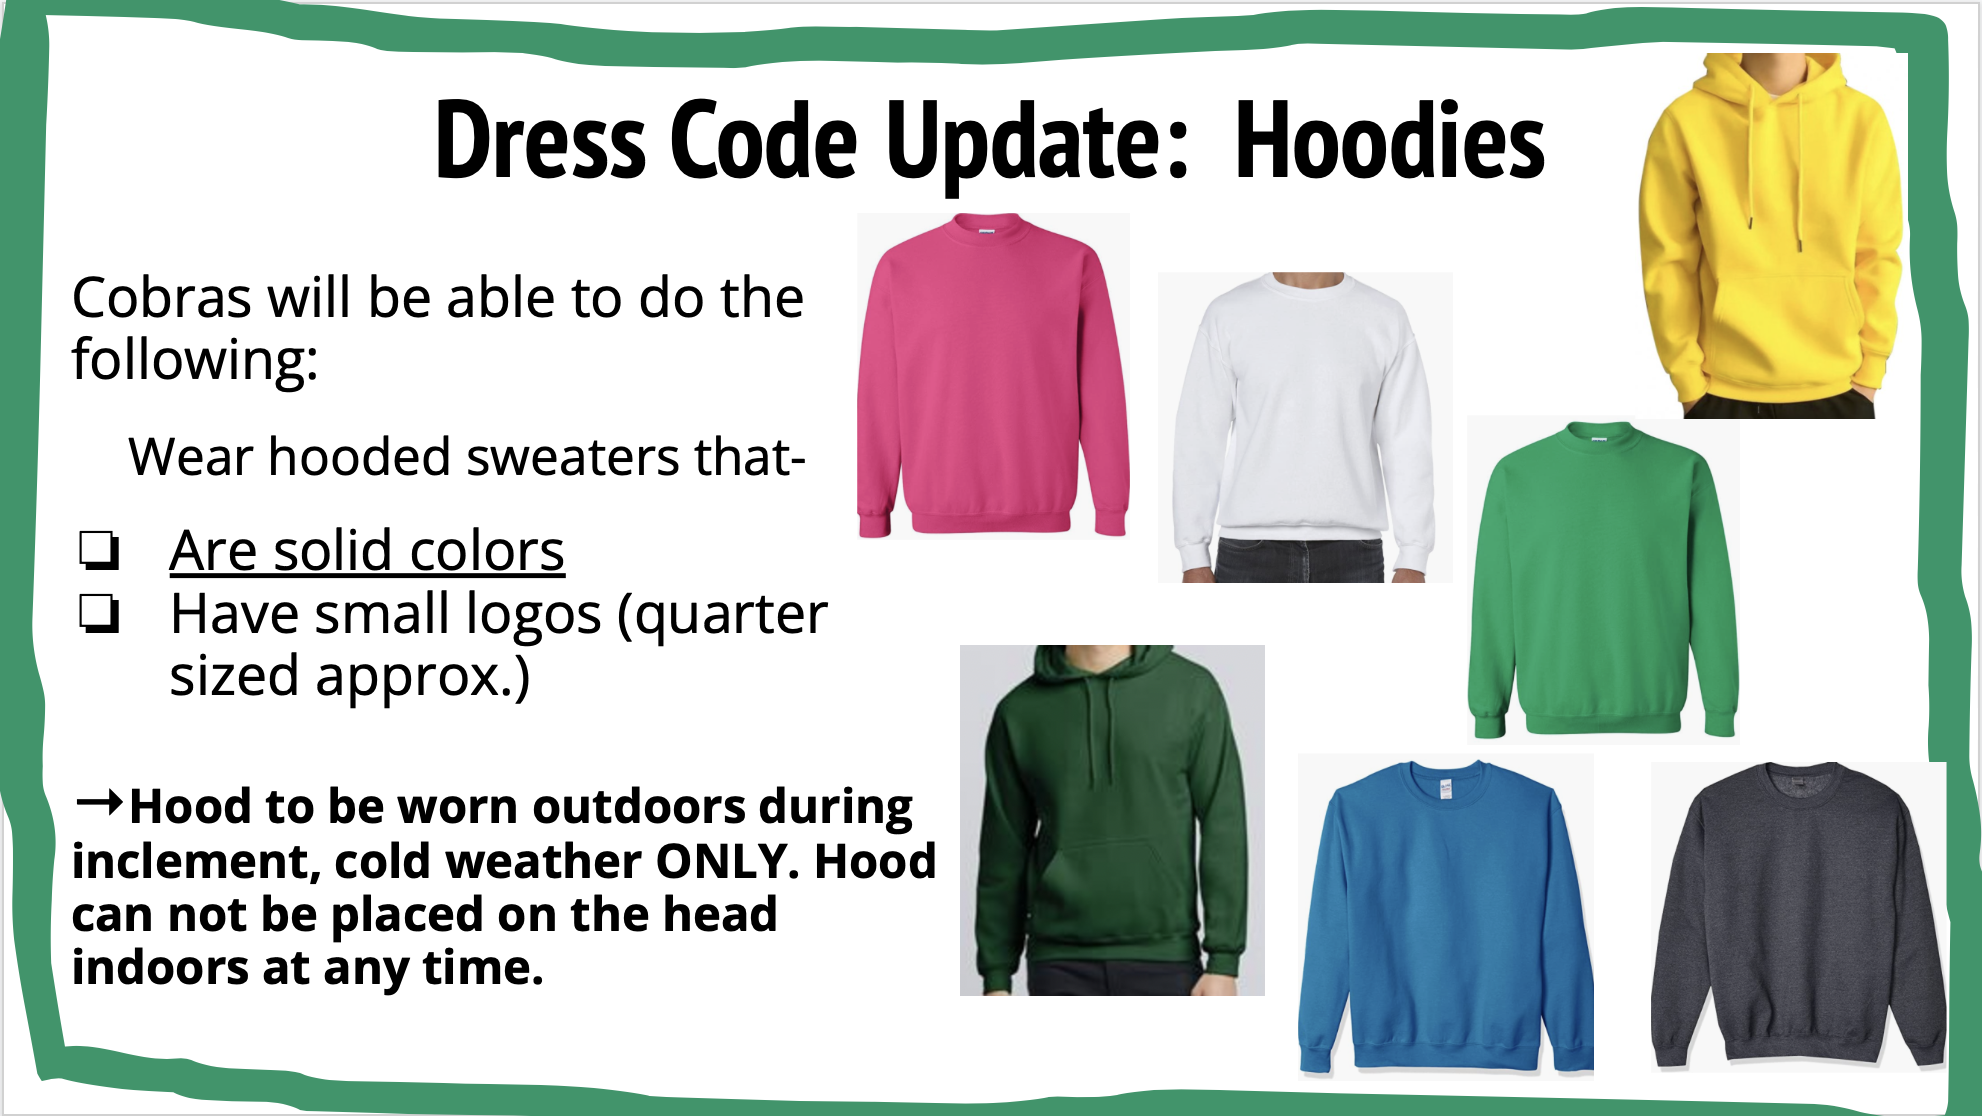 Update for student Dresscode, hoodies must be solid colors, no image larger than a quarter present. 